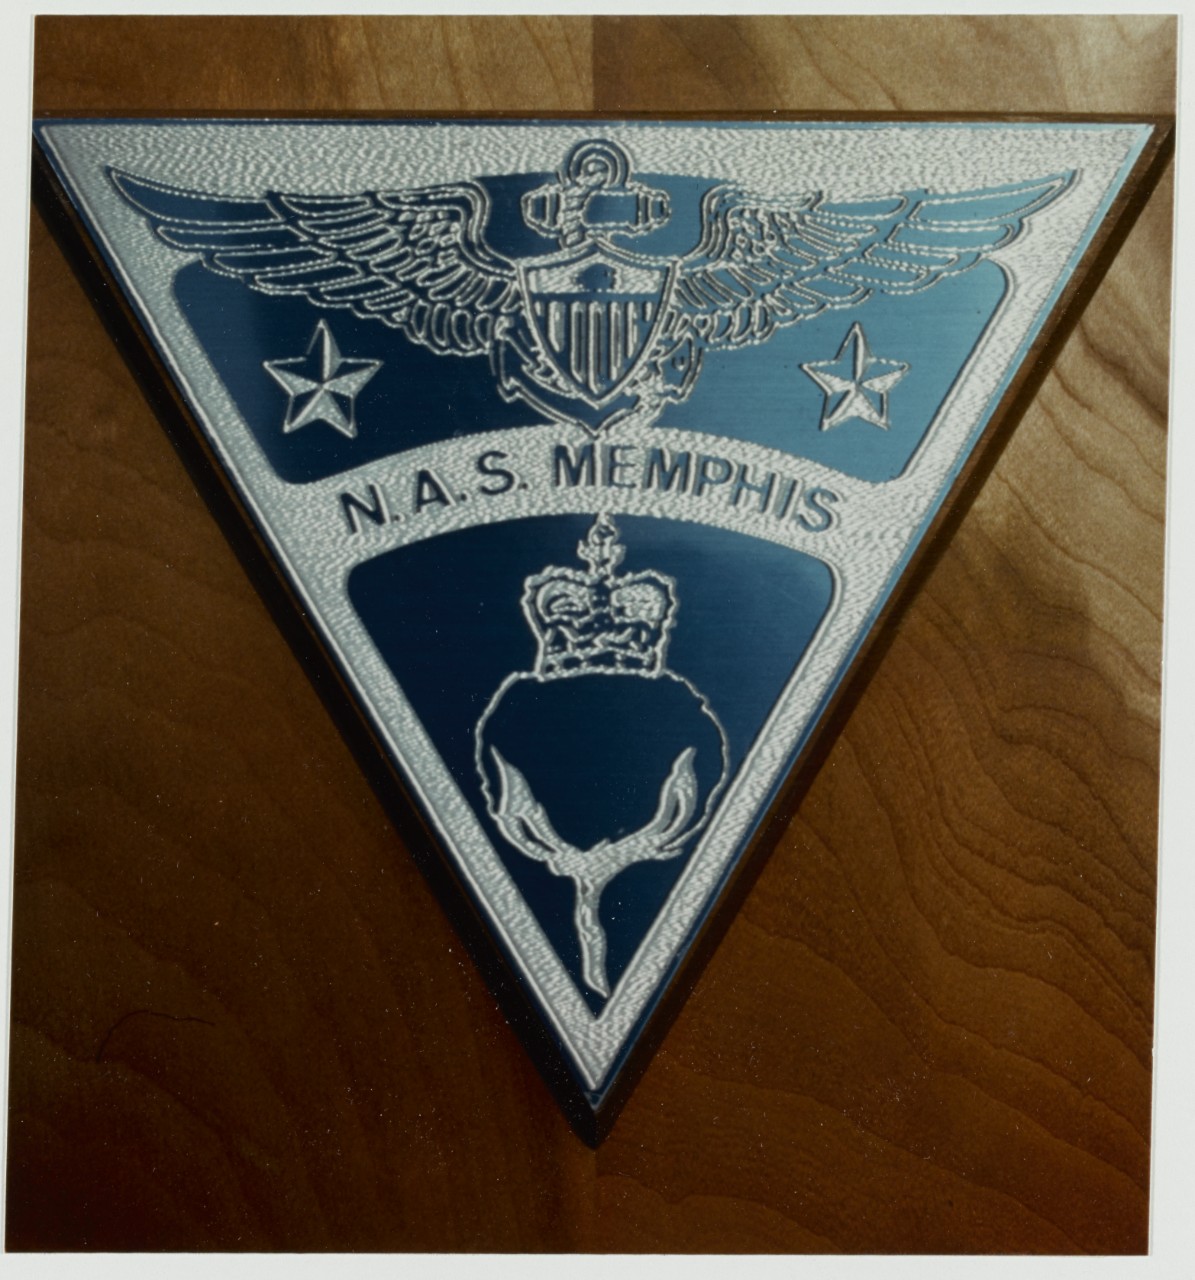 Insignia: Naval Air Station, Memphis, Tennessee